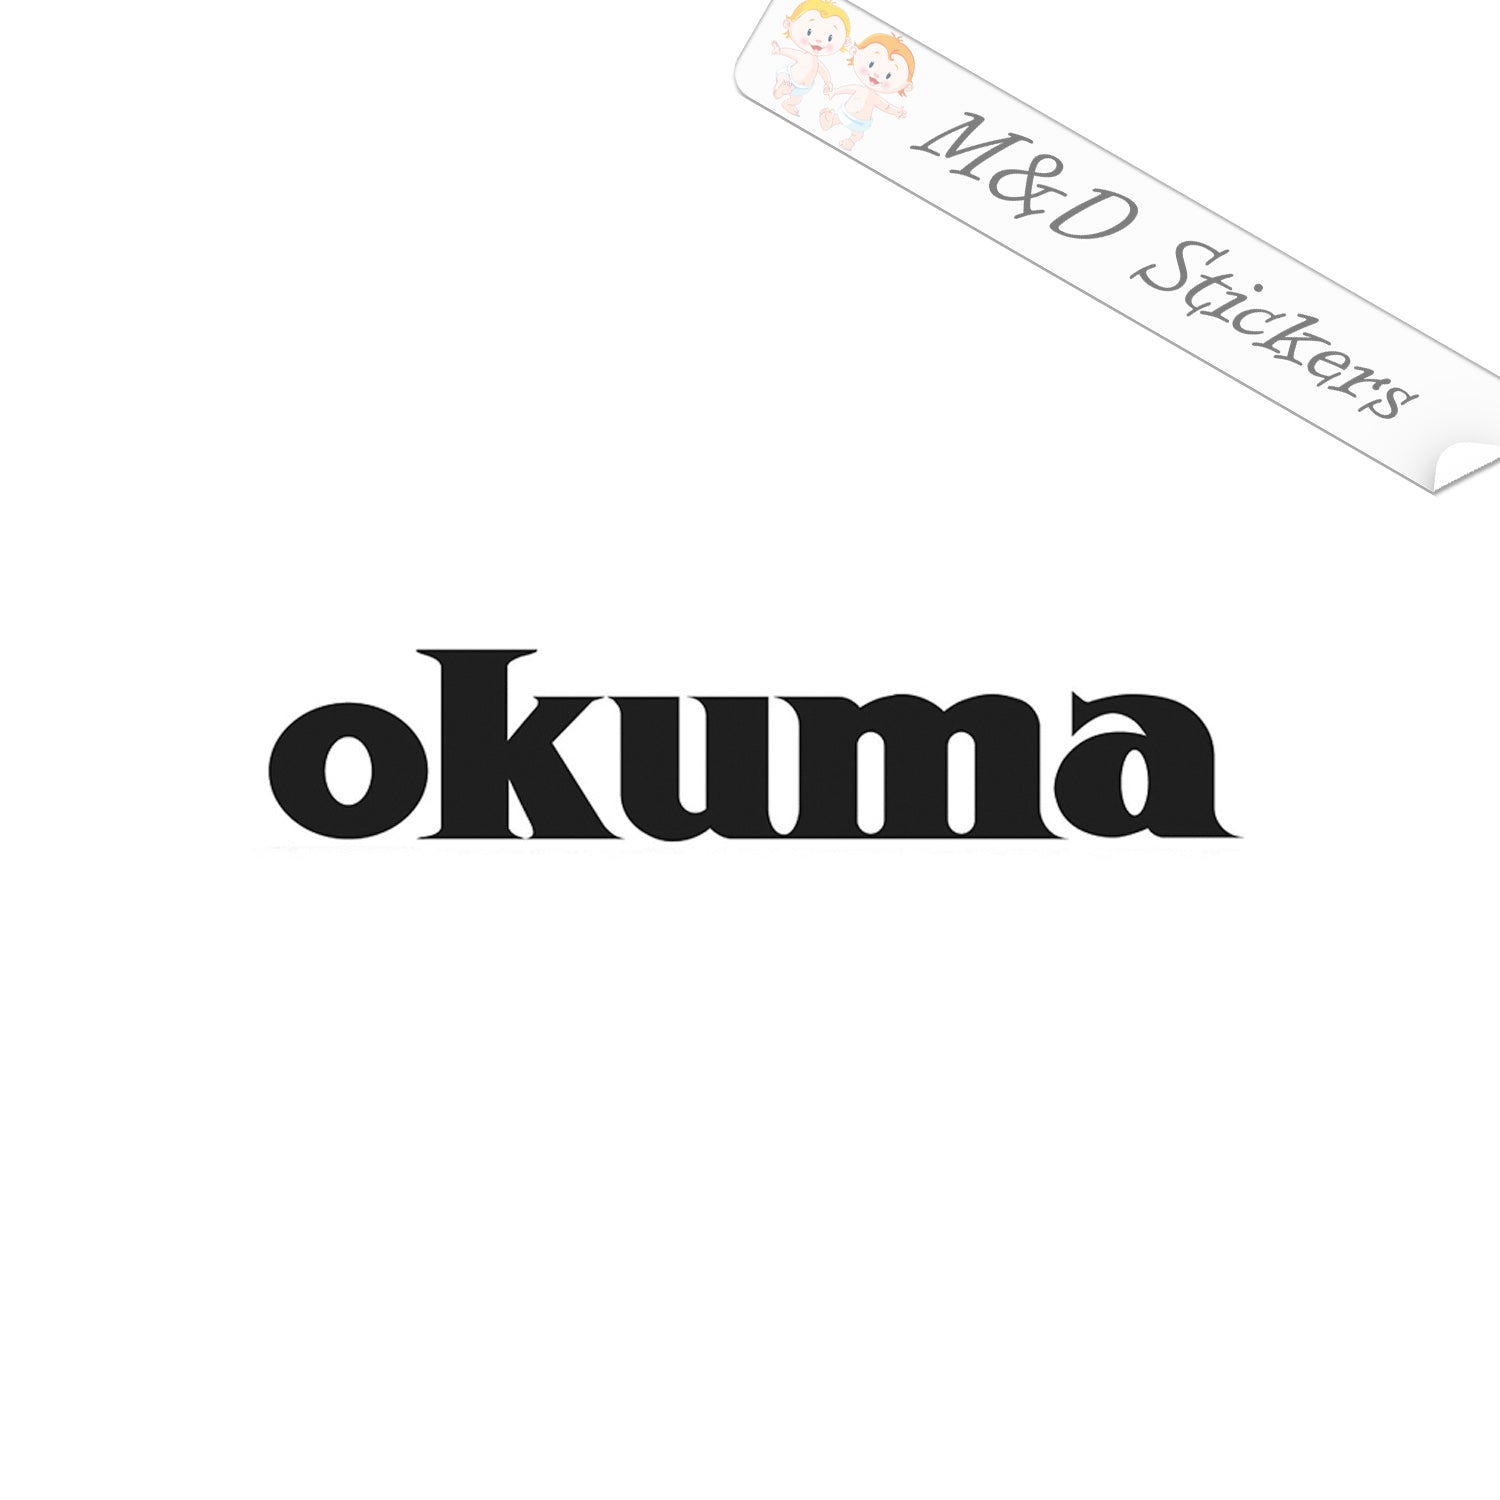 OKUMA High Perfomance Fishing Decals Amazing Outdoor Quality for Boat Truck  Tackle Box Ice Chest Decal High Quality Sticker Laminated USA 